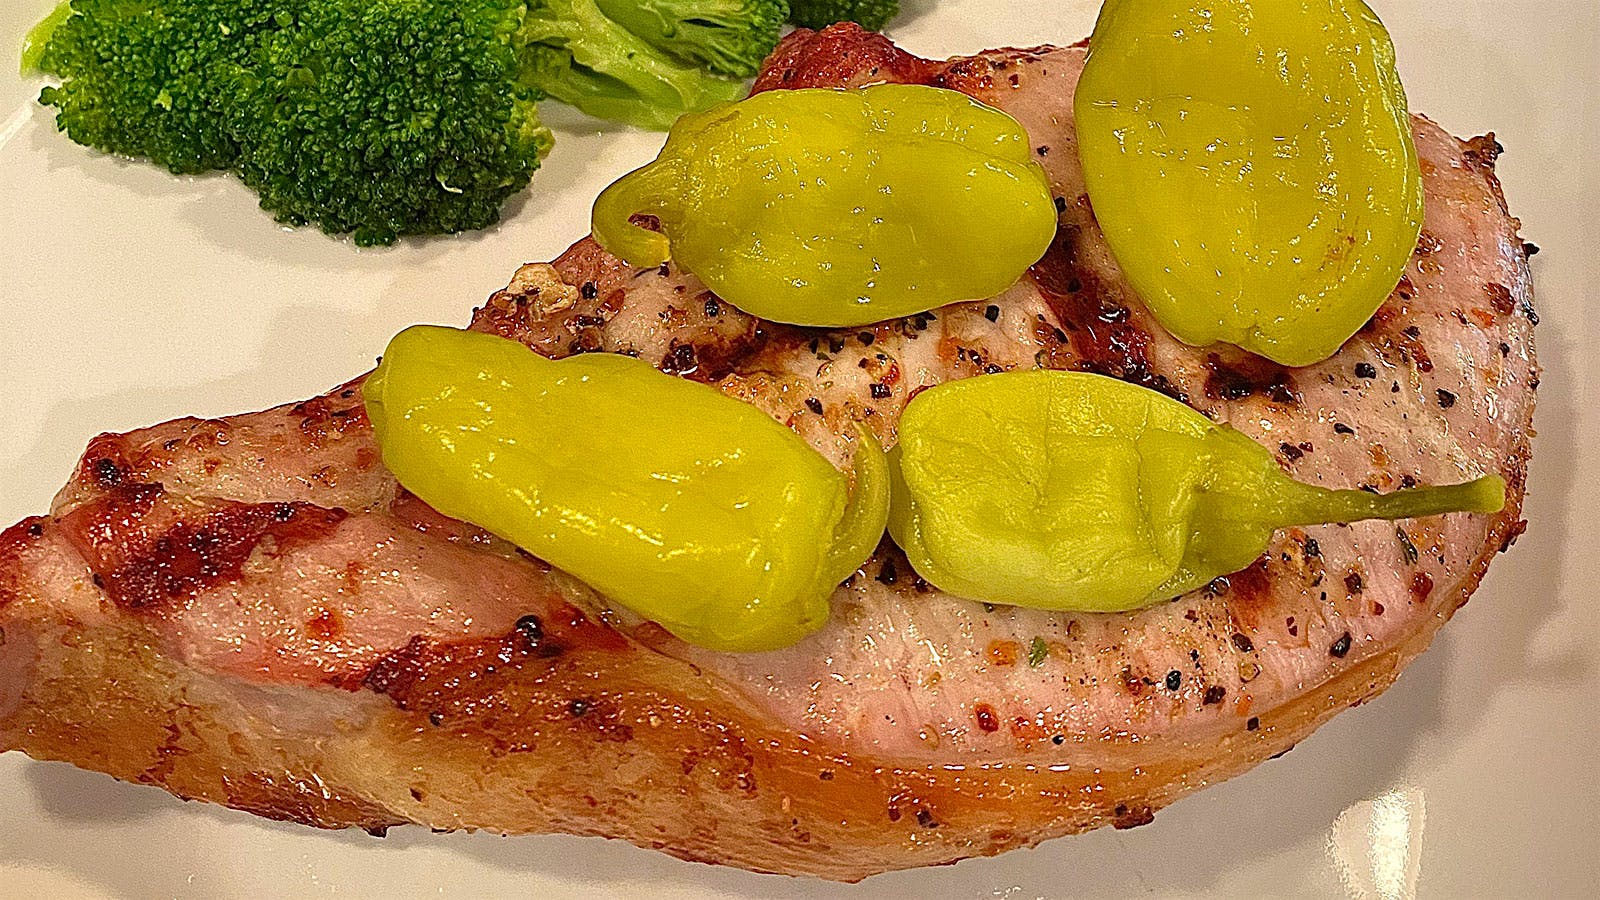 8 & $20 Recipe: Grilled Pork Chops With Pepperoncini and Steamed Broccoli